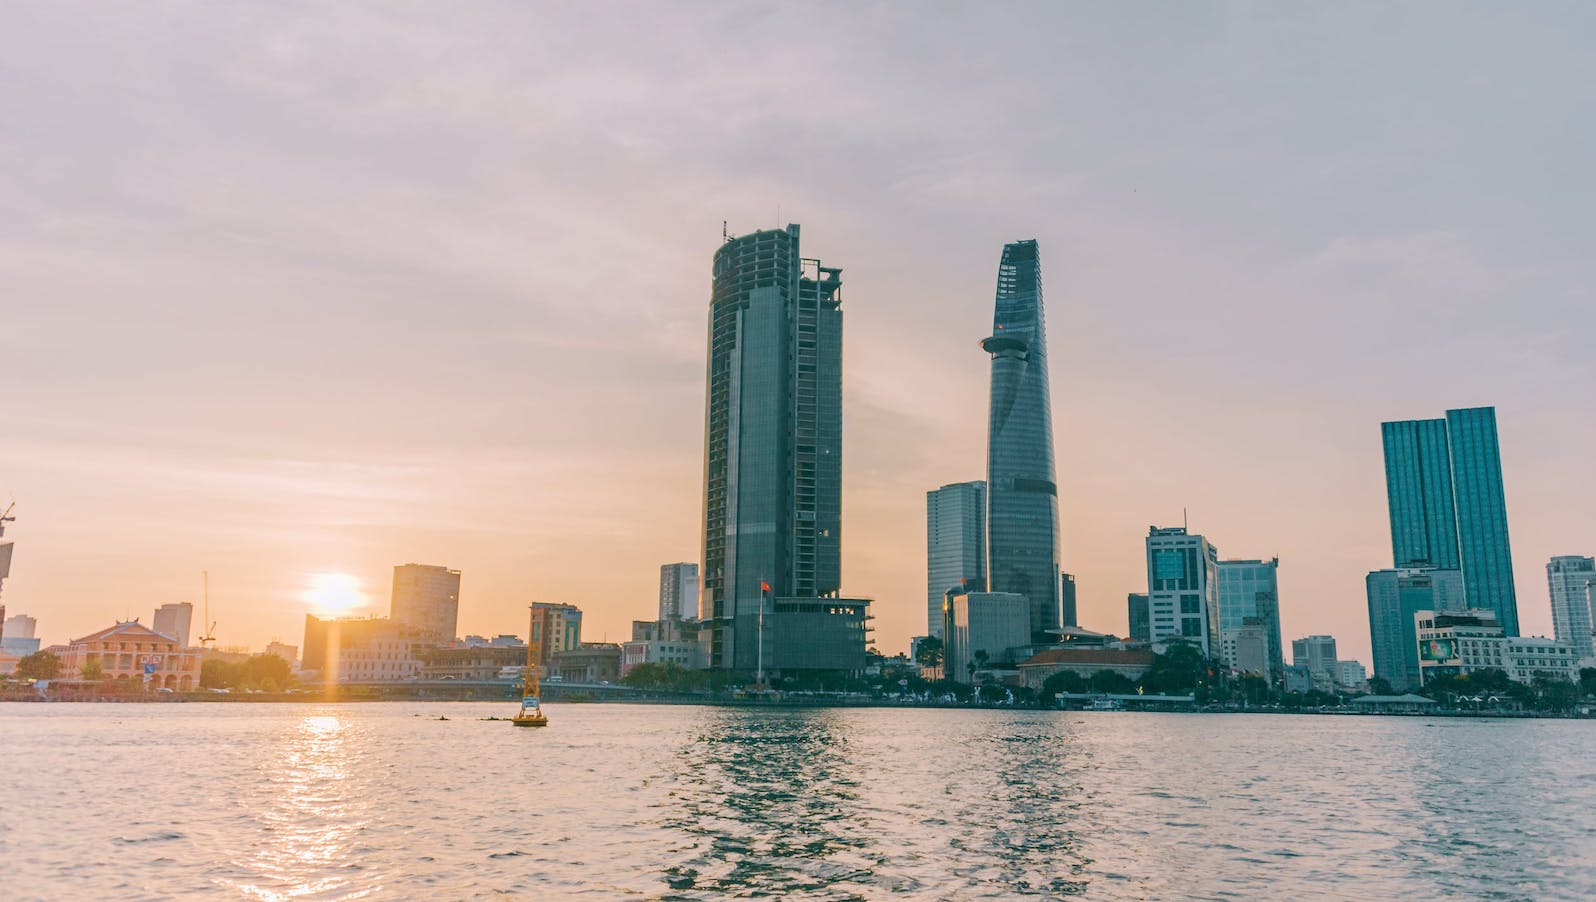 A view of tall buildings from across the water while the sun is setting